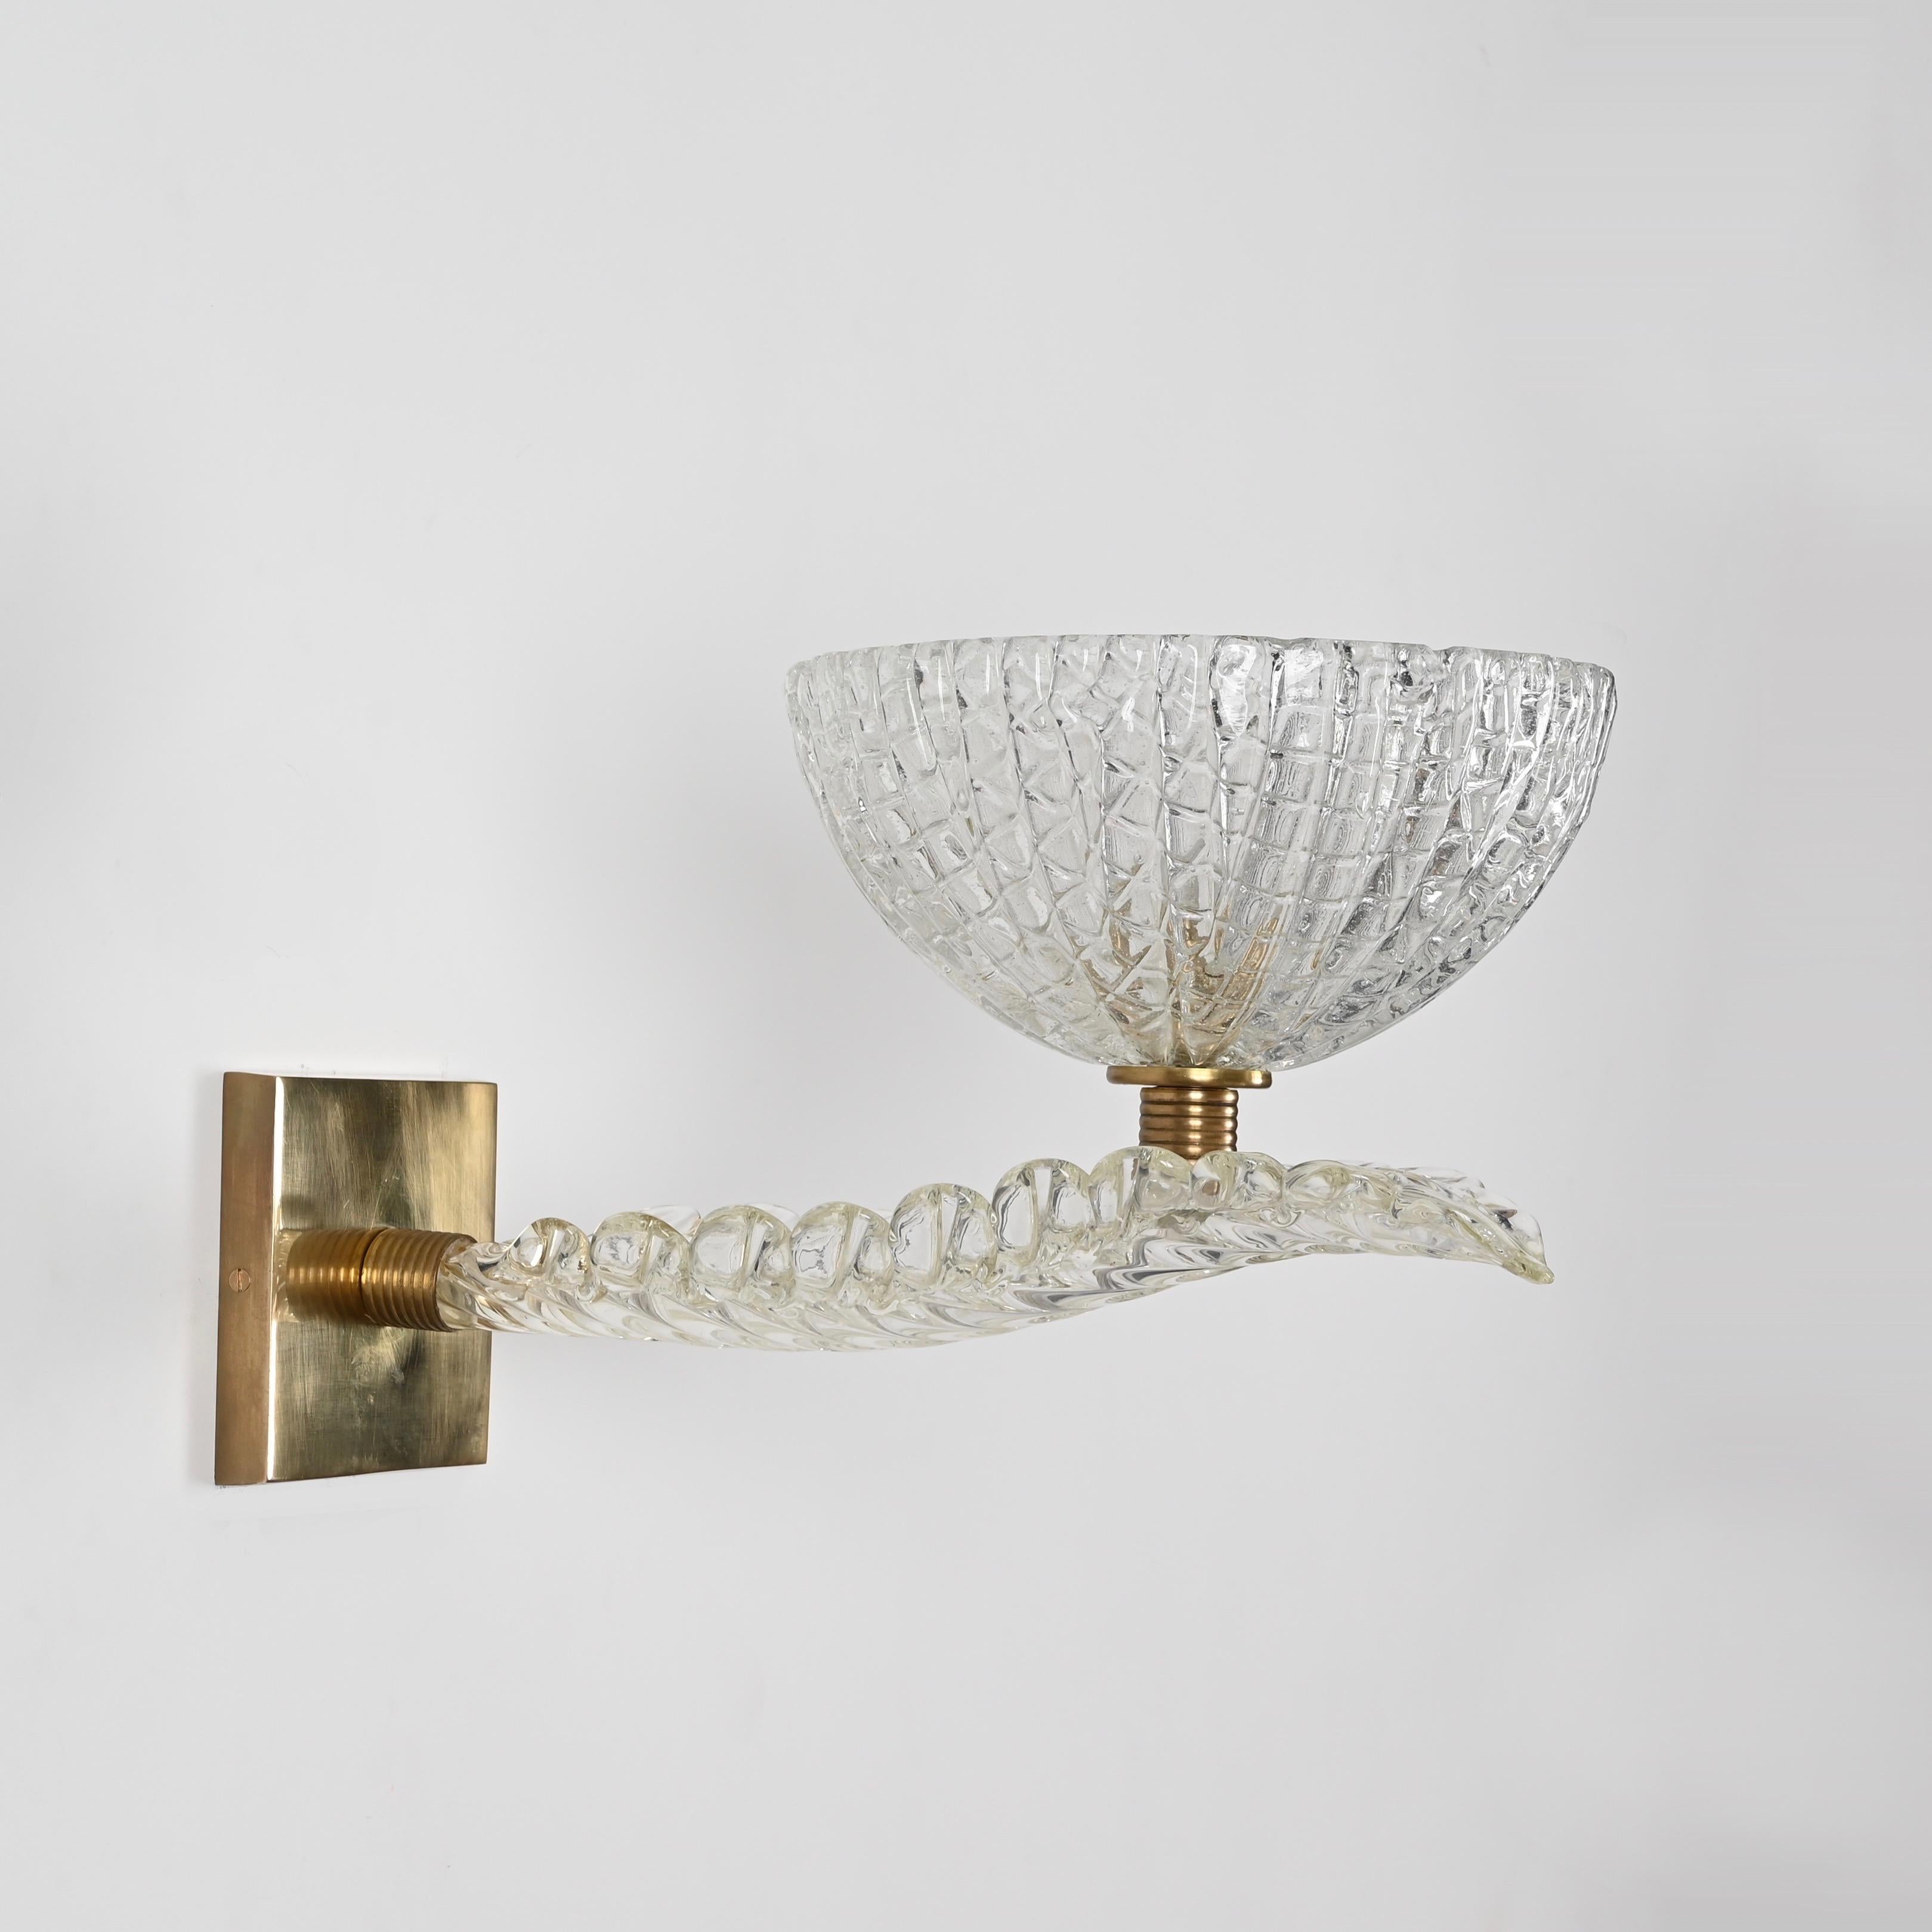 Huge Pair of Barovier Murano Leaf Glass and Brass Sconces, Italy 1950s For Sale 5